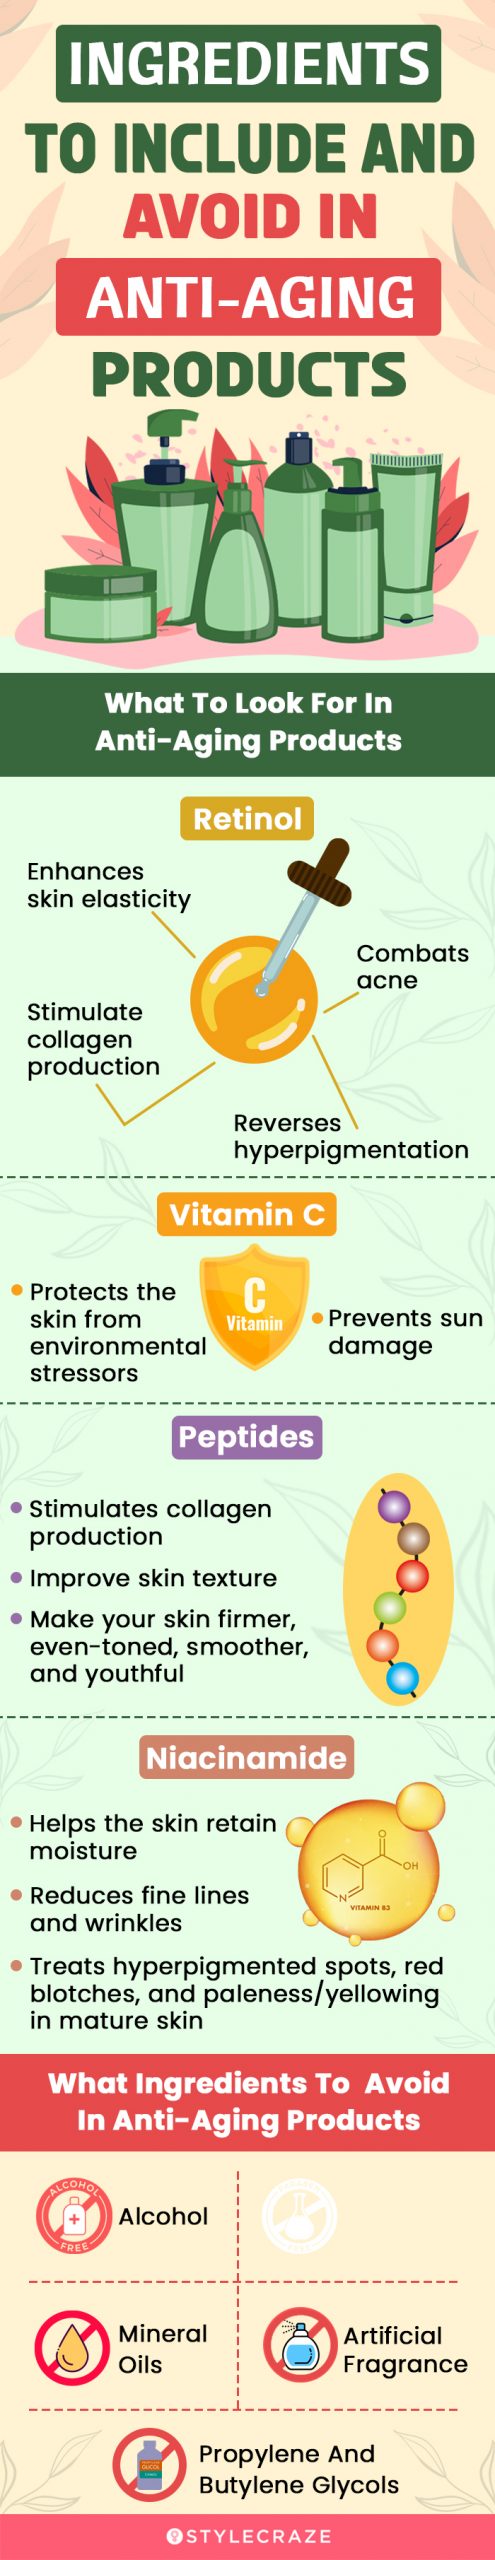 Ingredients To Include And Avoid In Anti-Aging Products (infographic)